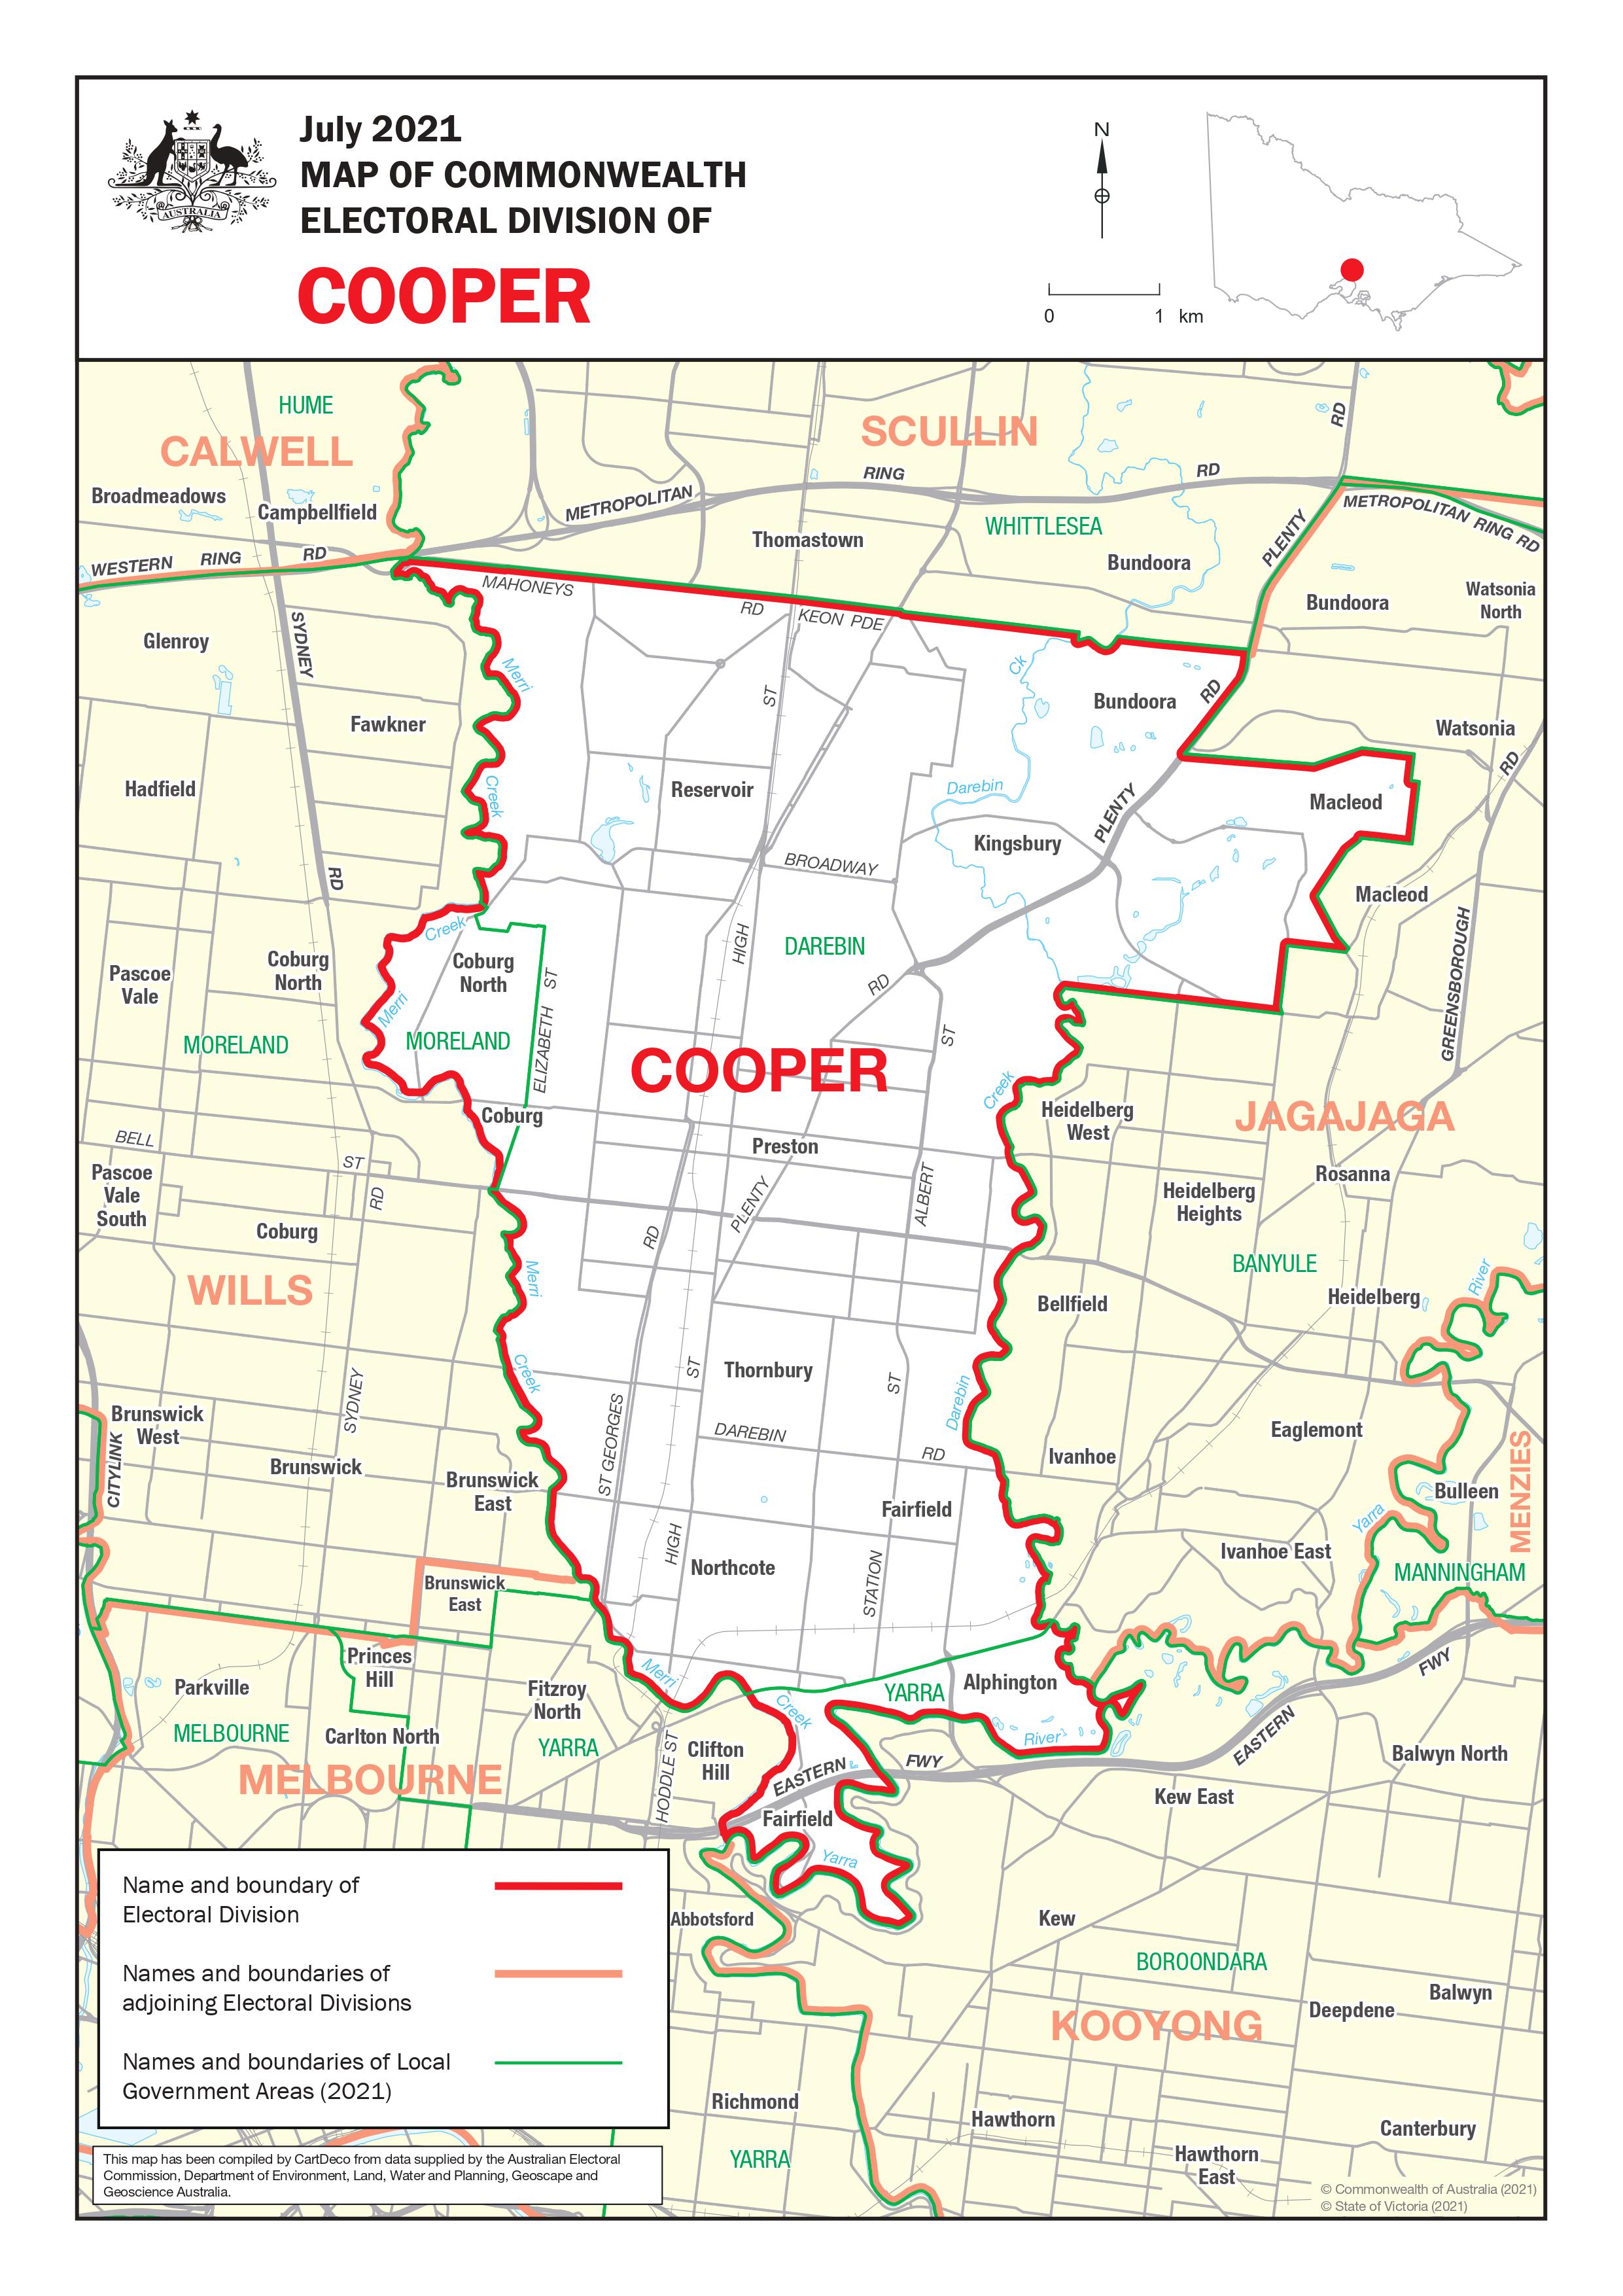 Map of Commonwealth Electoral Division of Cooper